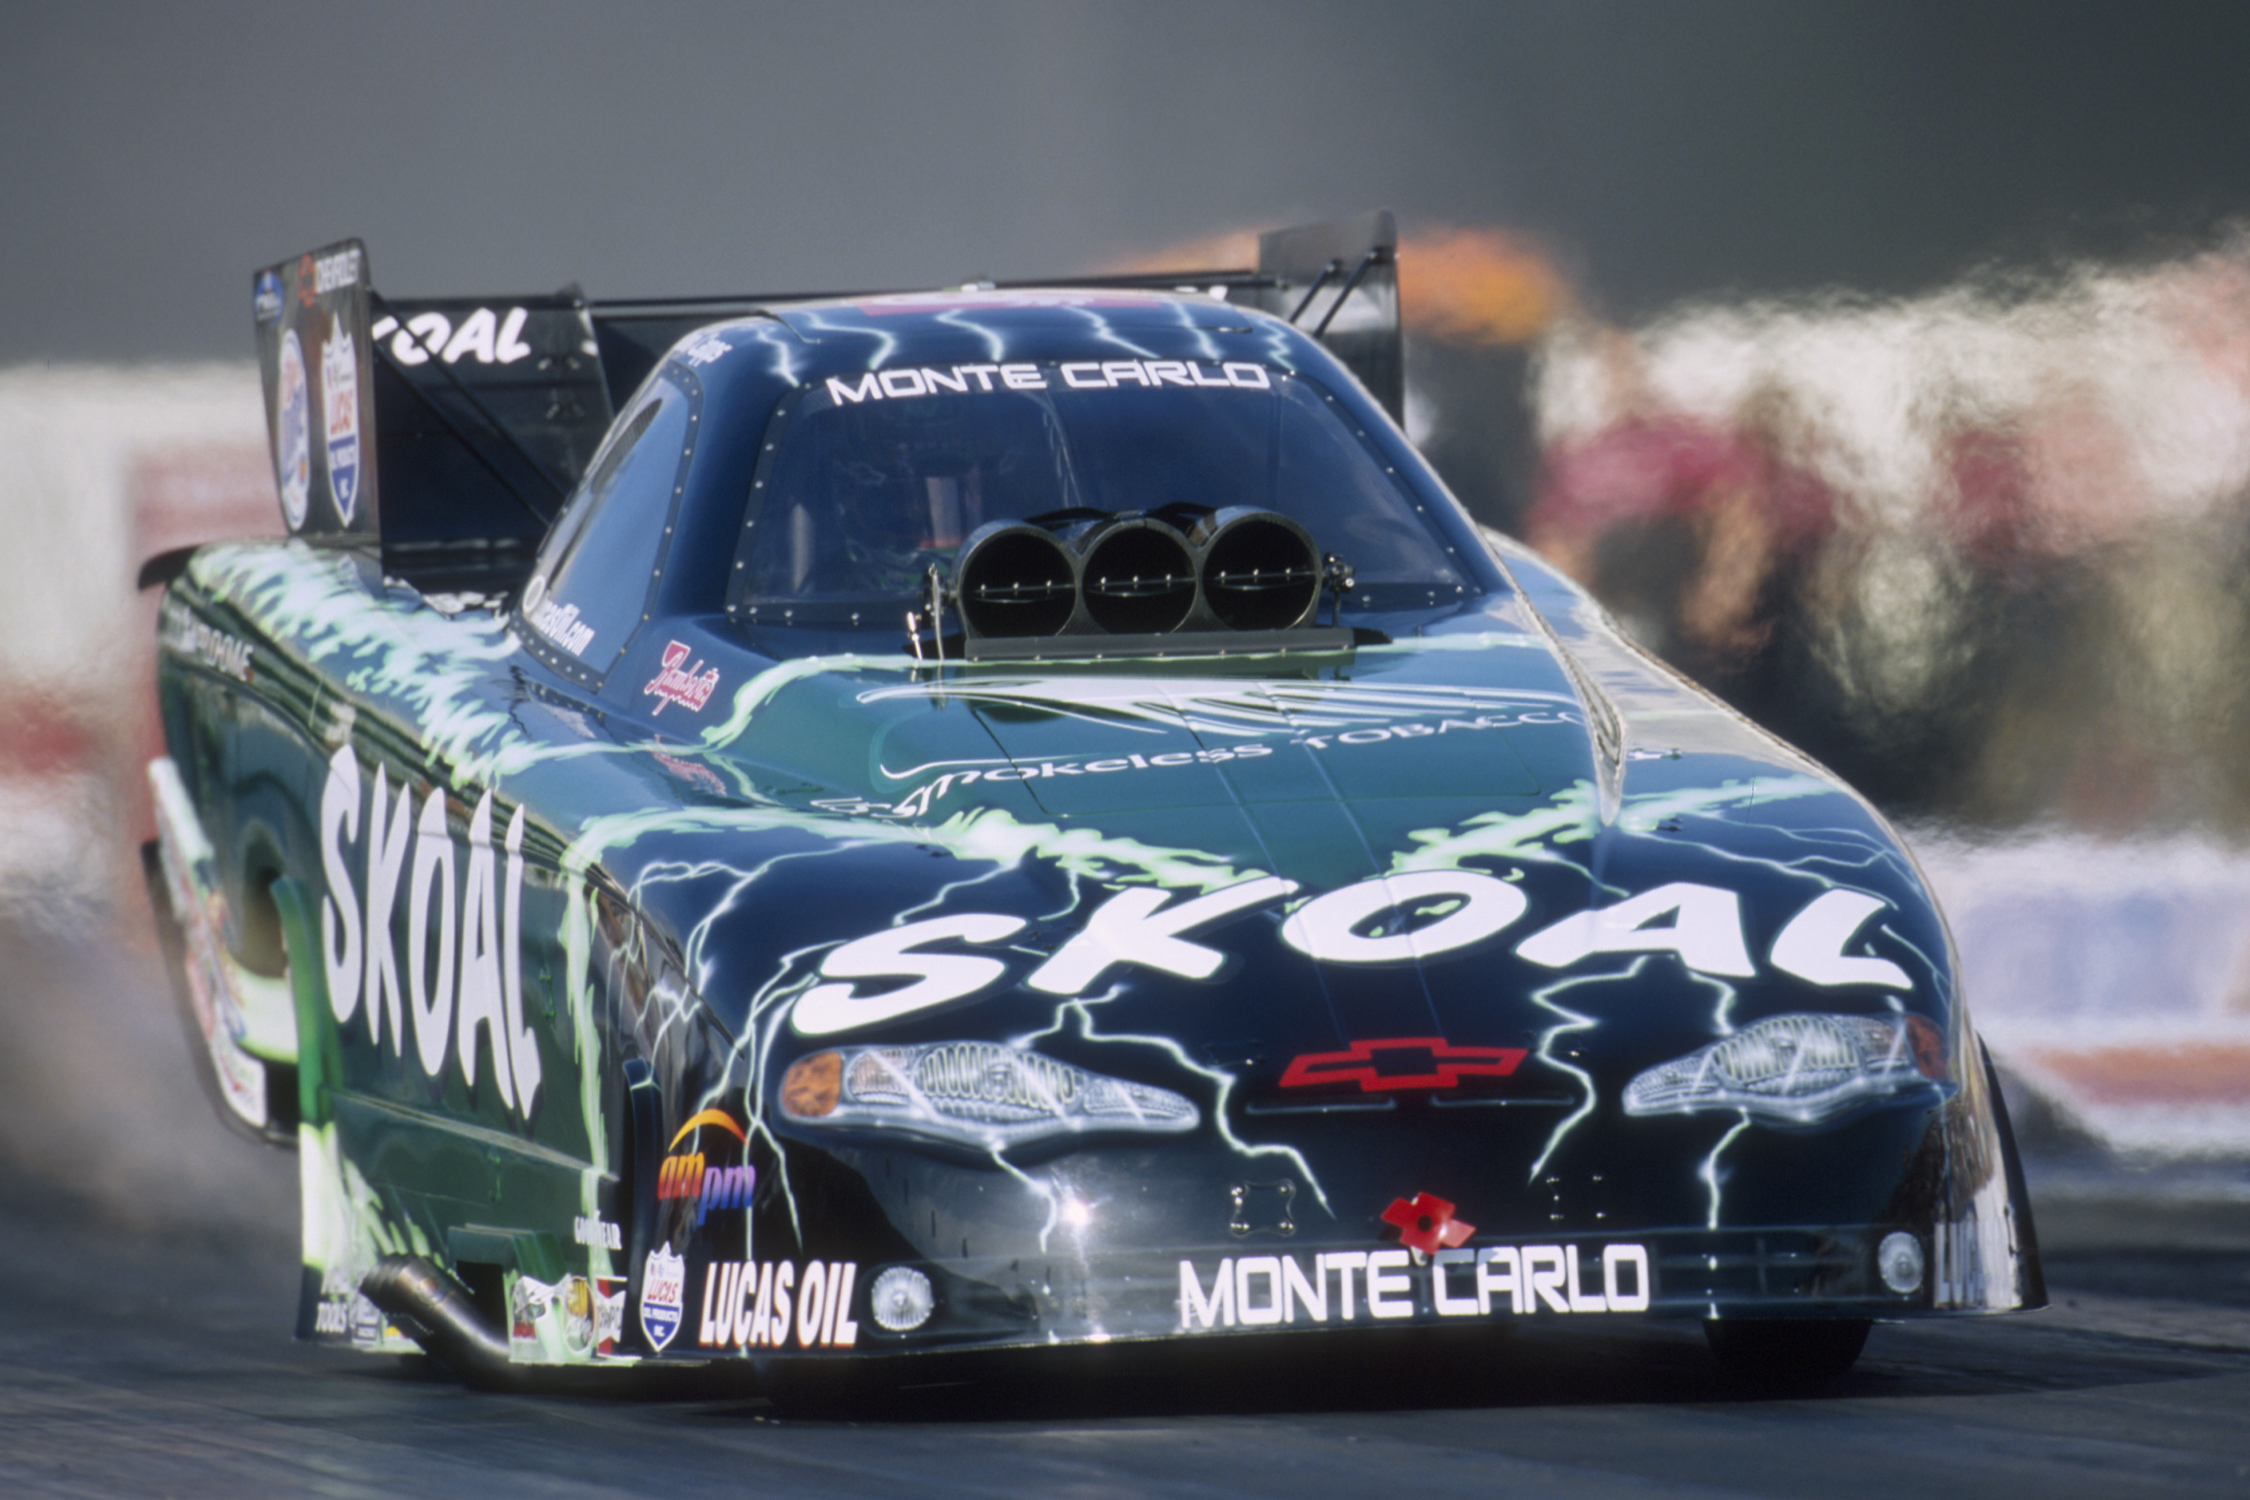 Nhra Funny Car Wallpaper Submited Image